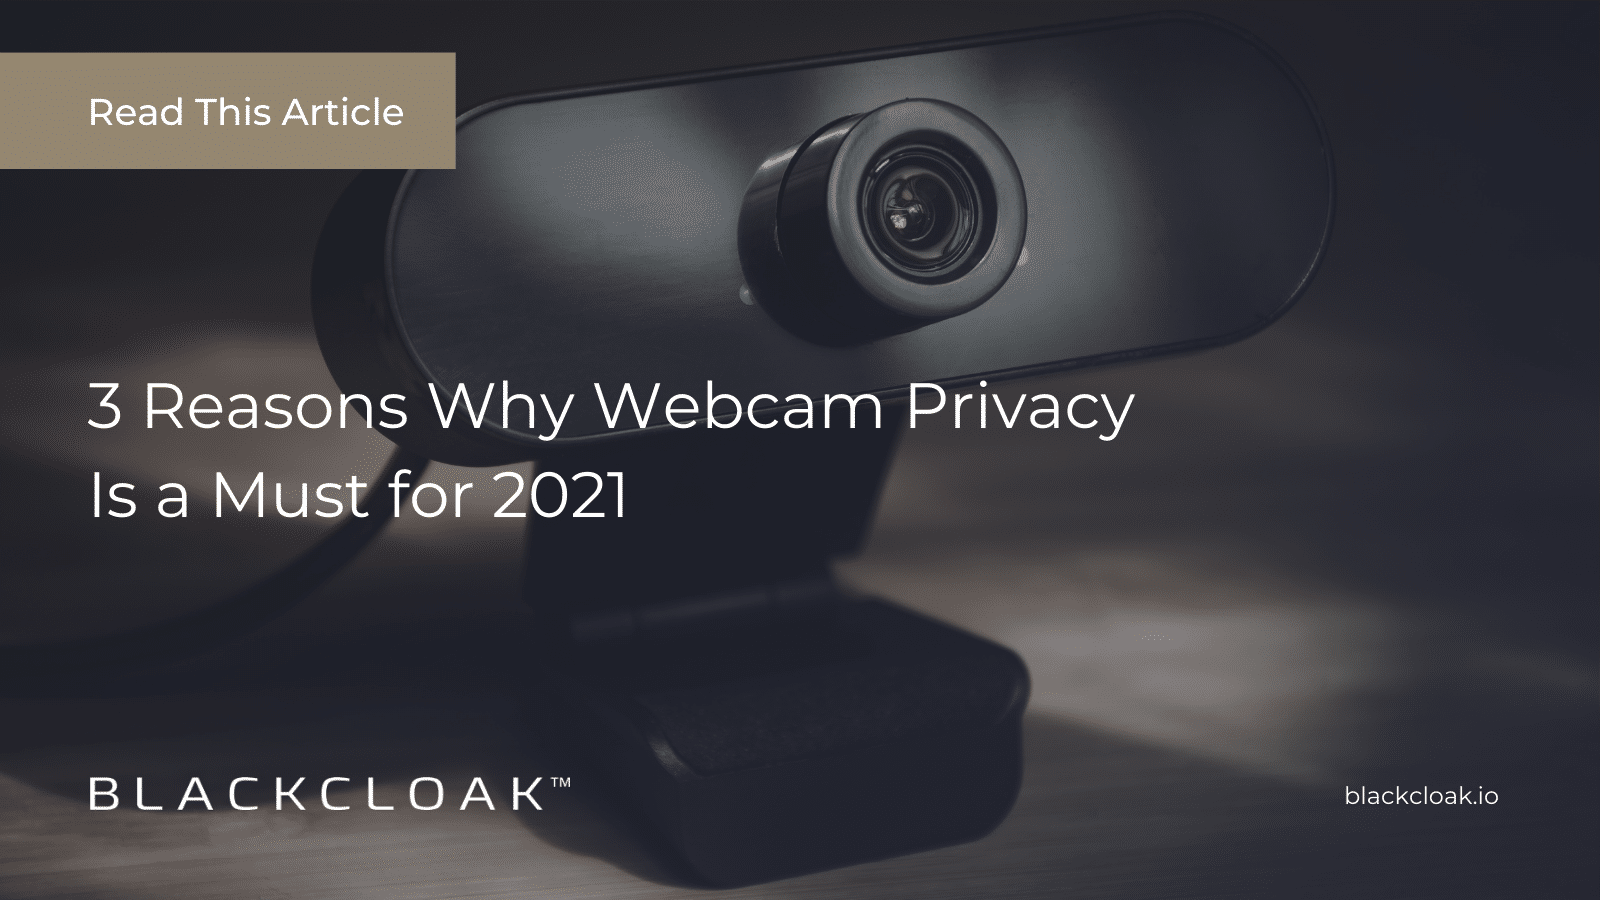 3 Reasons Why Webcam Privacy Is a Must BlackCloak Blog Post